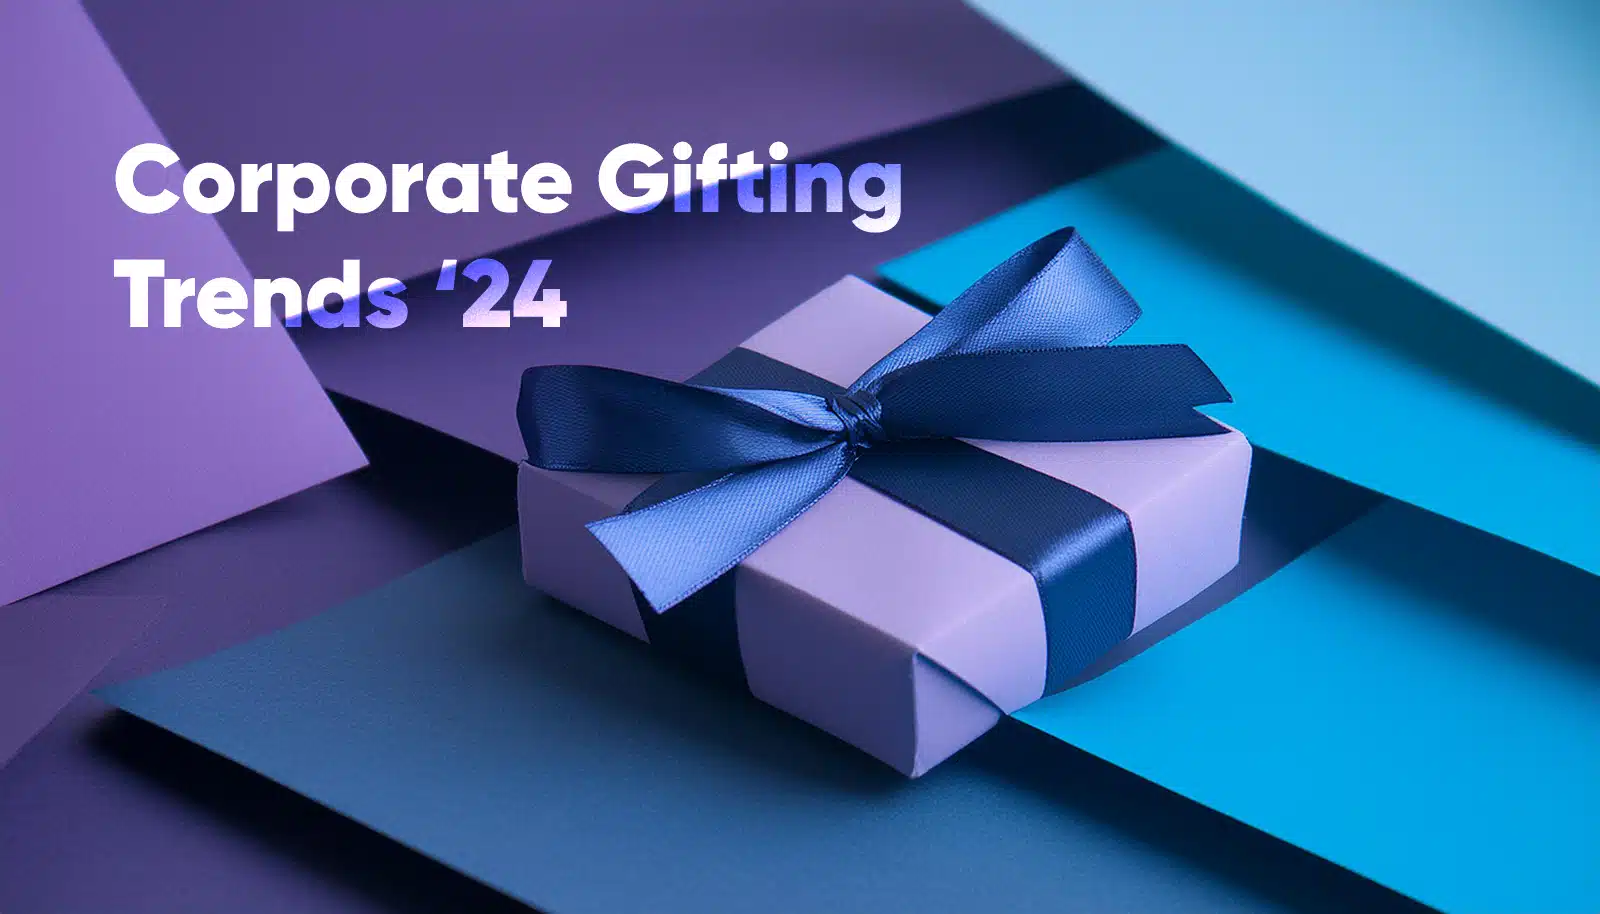 Gift on purple and blue background with text that says Corporate Gifting Trends '24